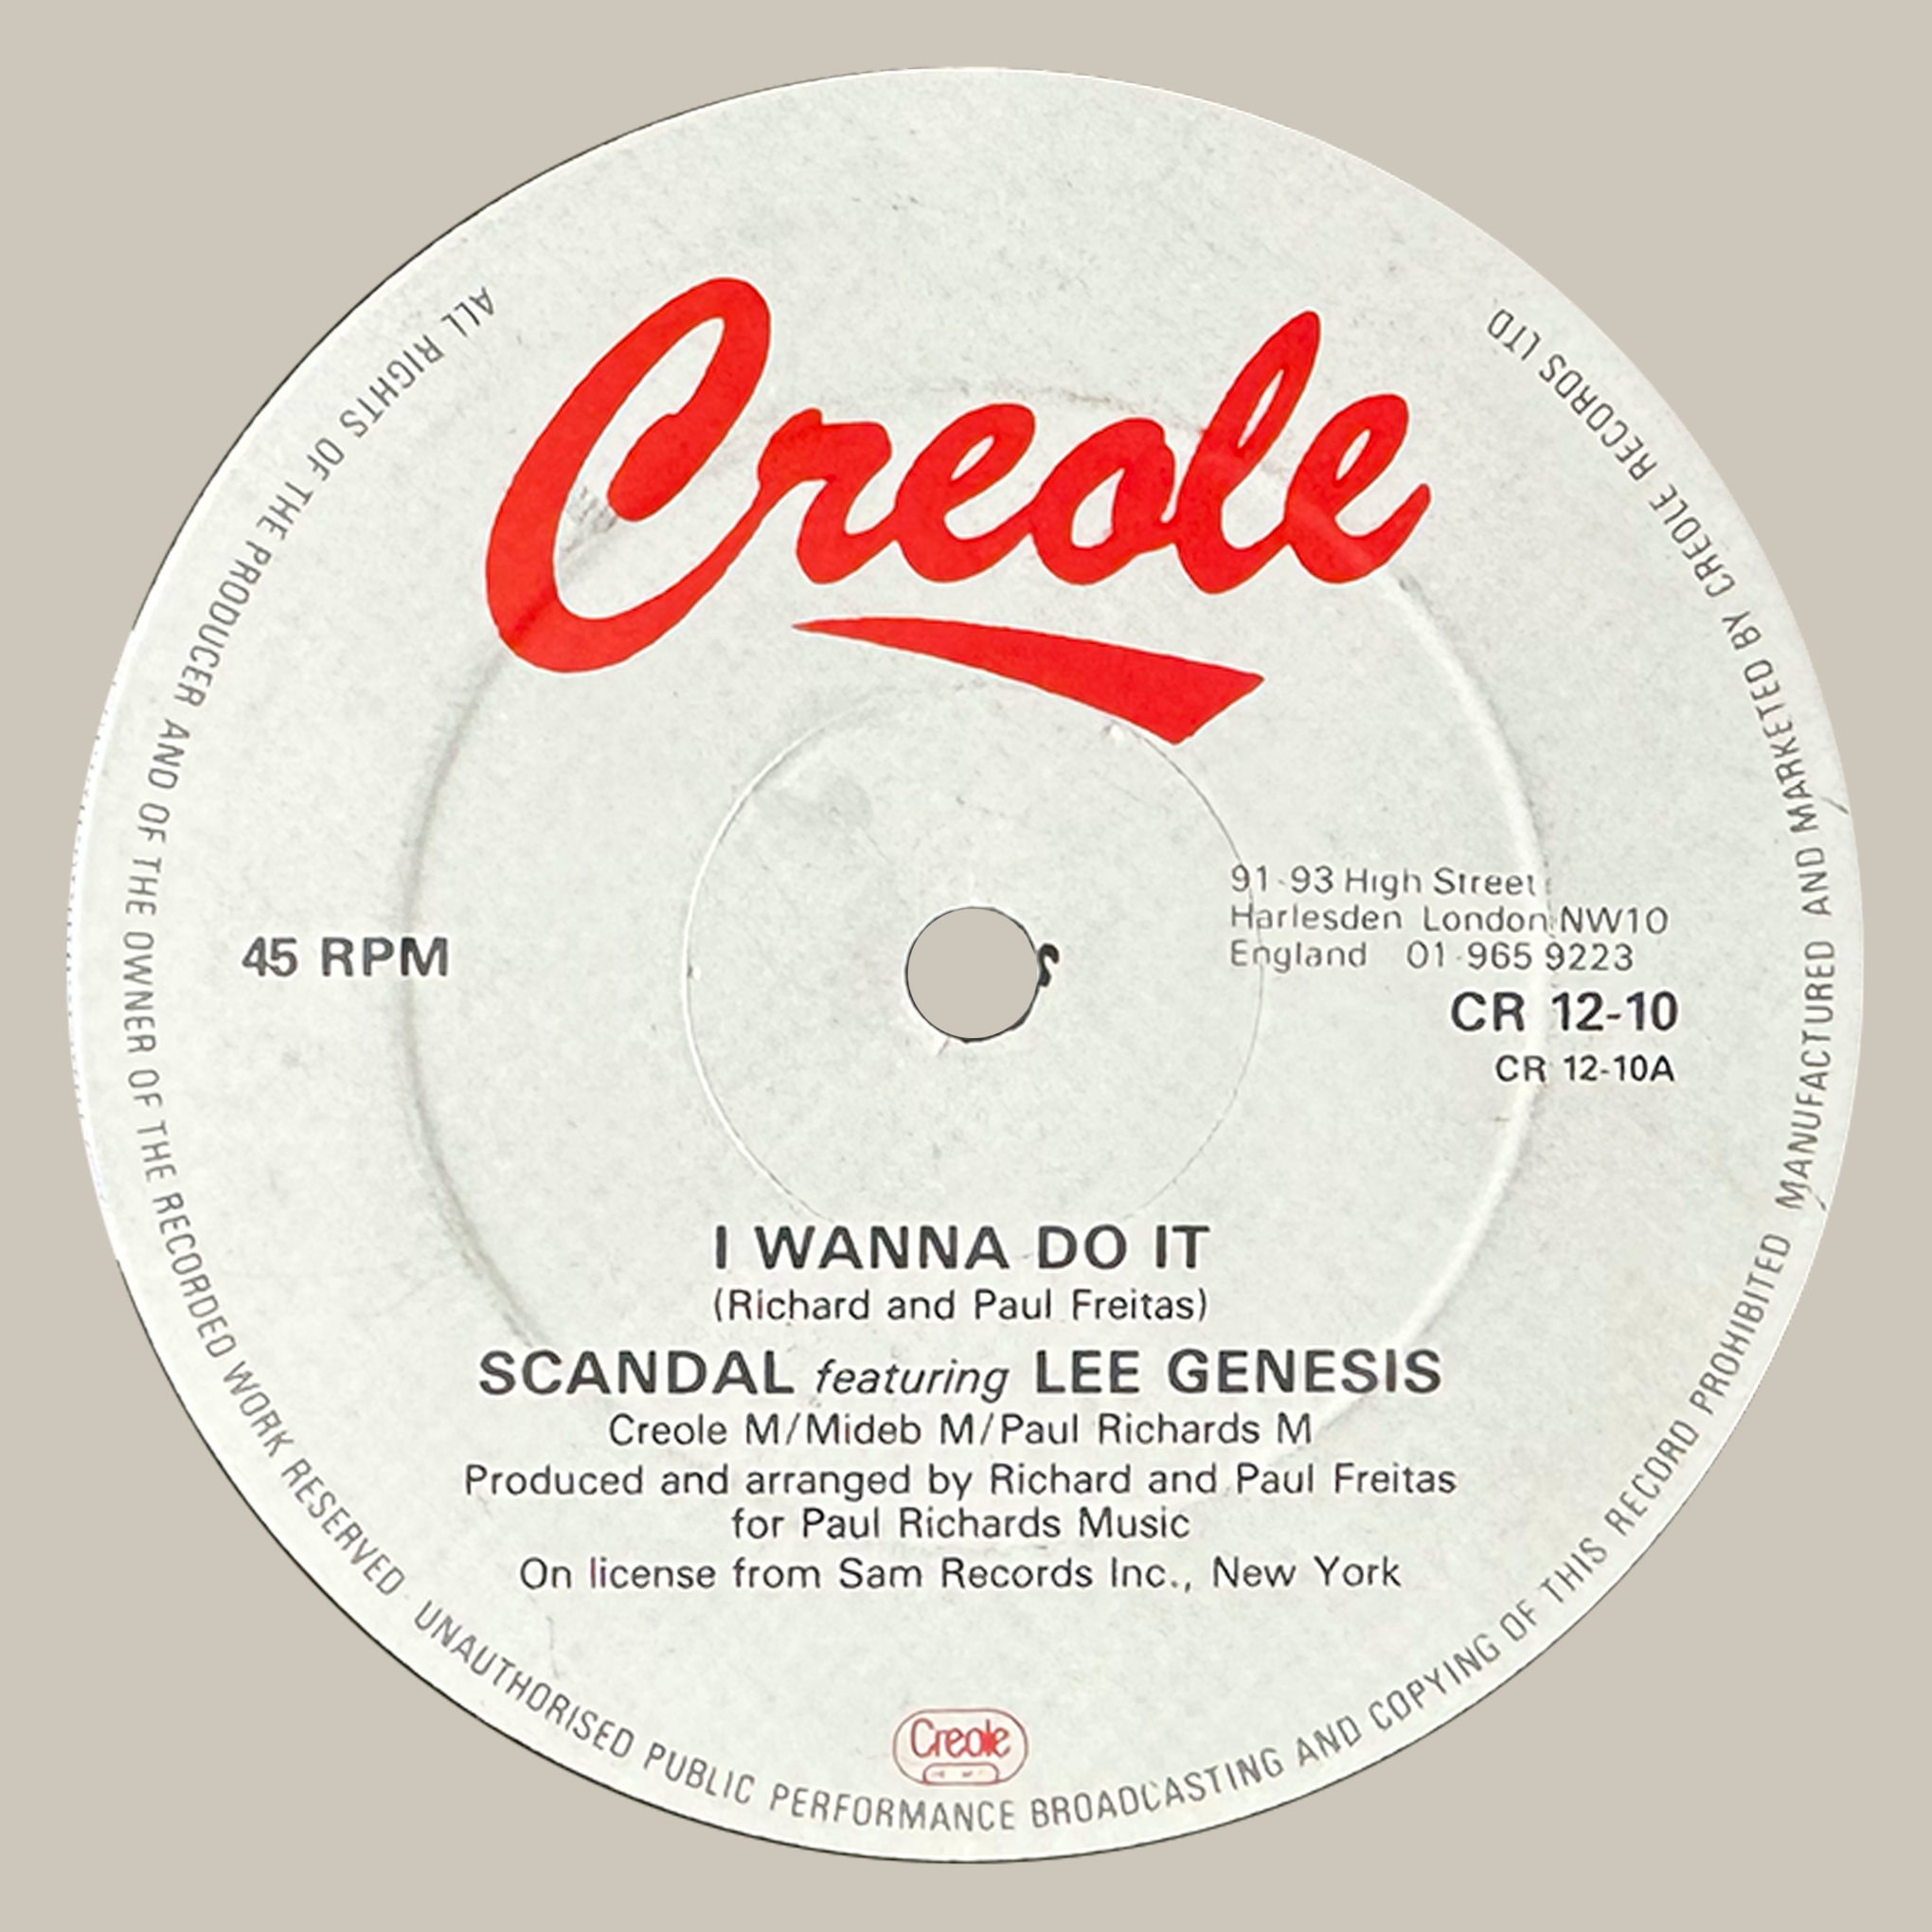 Scandal Featuring Lee Genesis ‎– I Wanna Do It [USED]